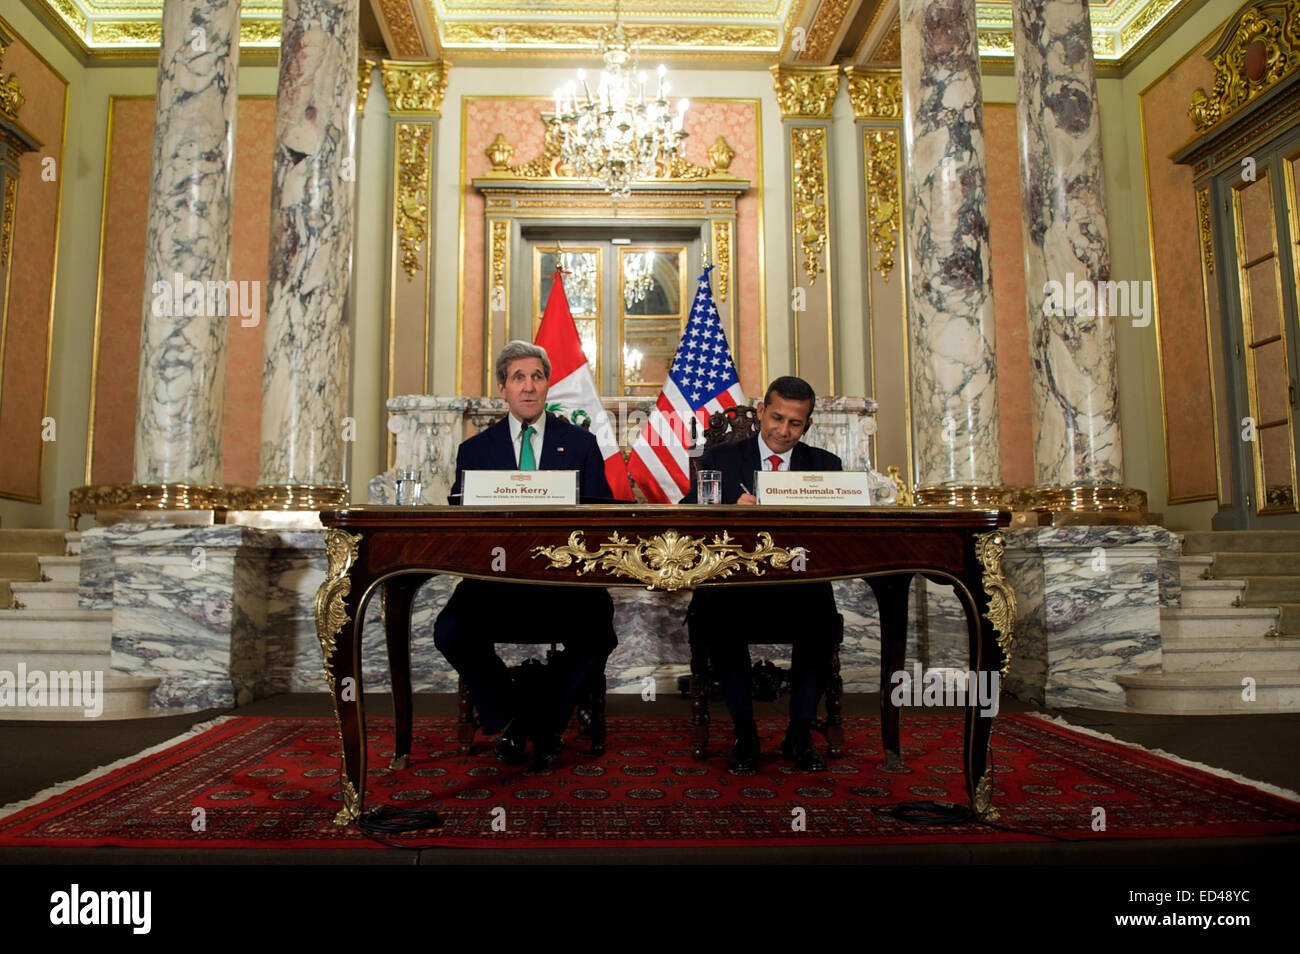 U.S. Secretary of State John Kerry and President Ollanta Humala of Peru deliver a pair of statements to news reporters following a bilateral meeting in the Presidential Palace in Lima, Peru, on Dec. 11, 2014, and after the Secretary addressed the 20th session of the Conference of the Parties to the United Nations Framework Convention on Climate Change. Stock Photo